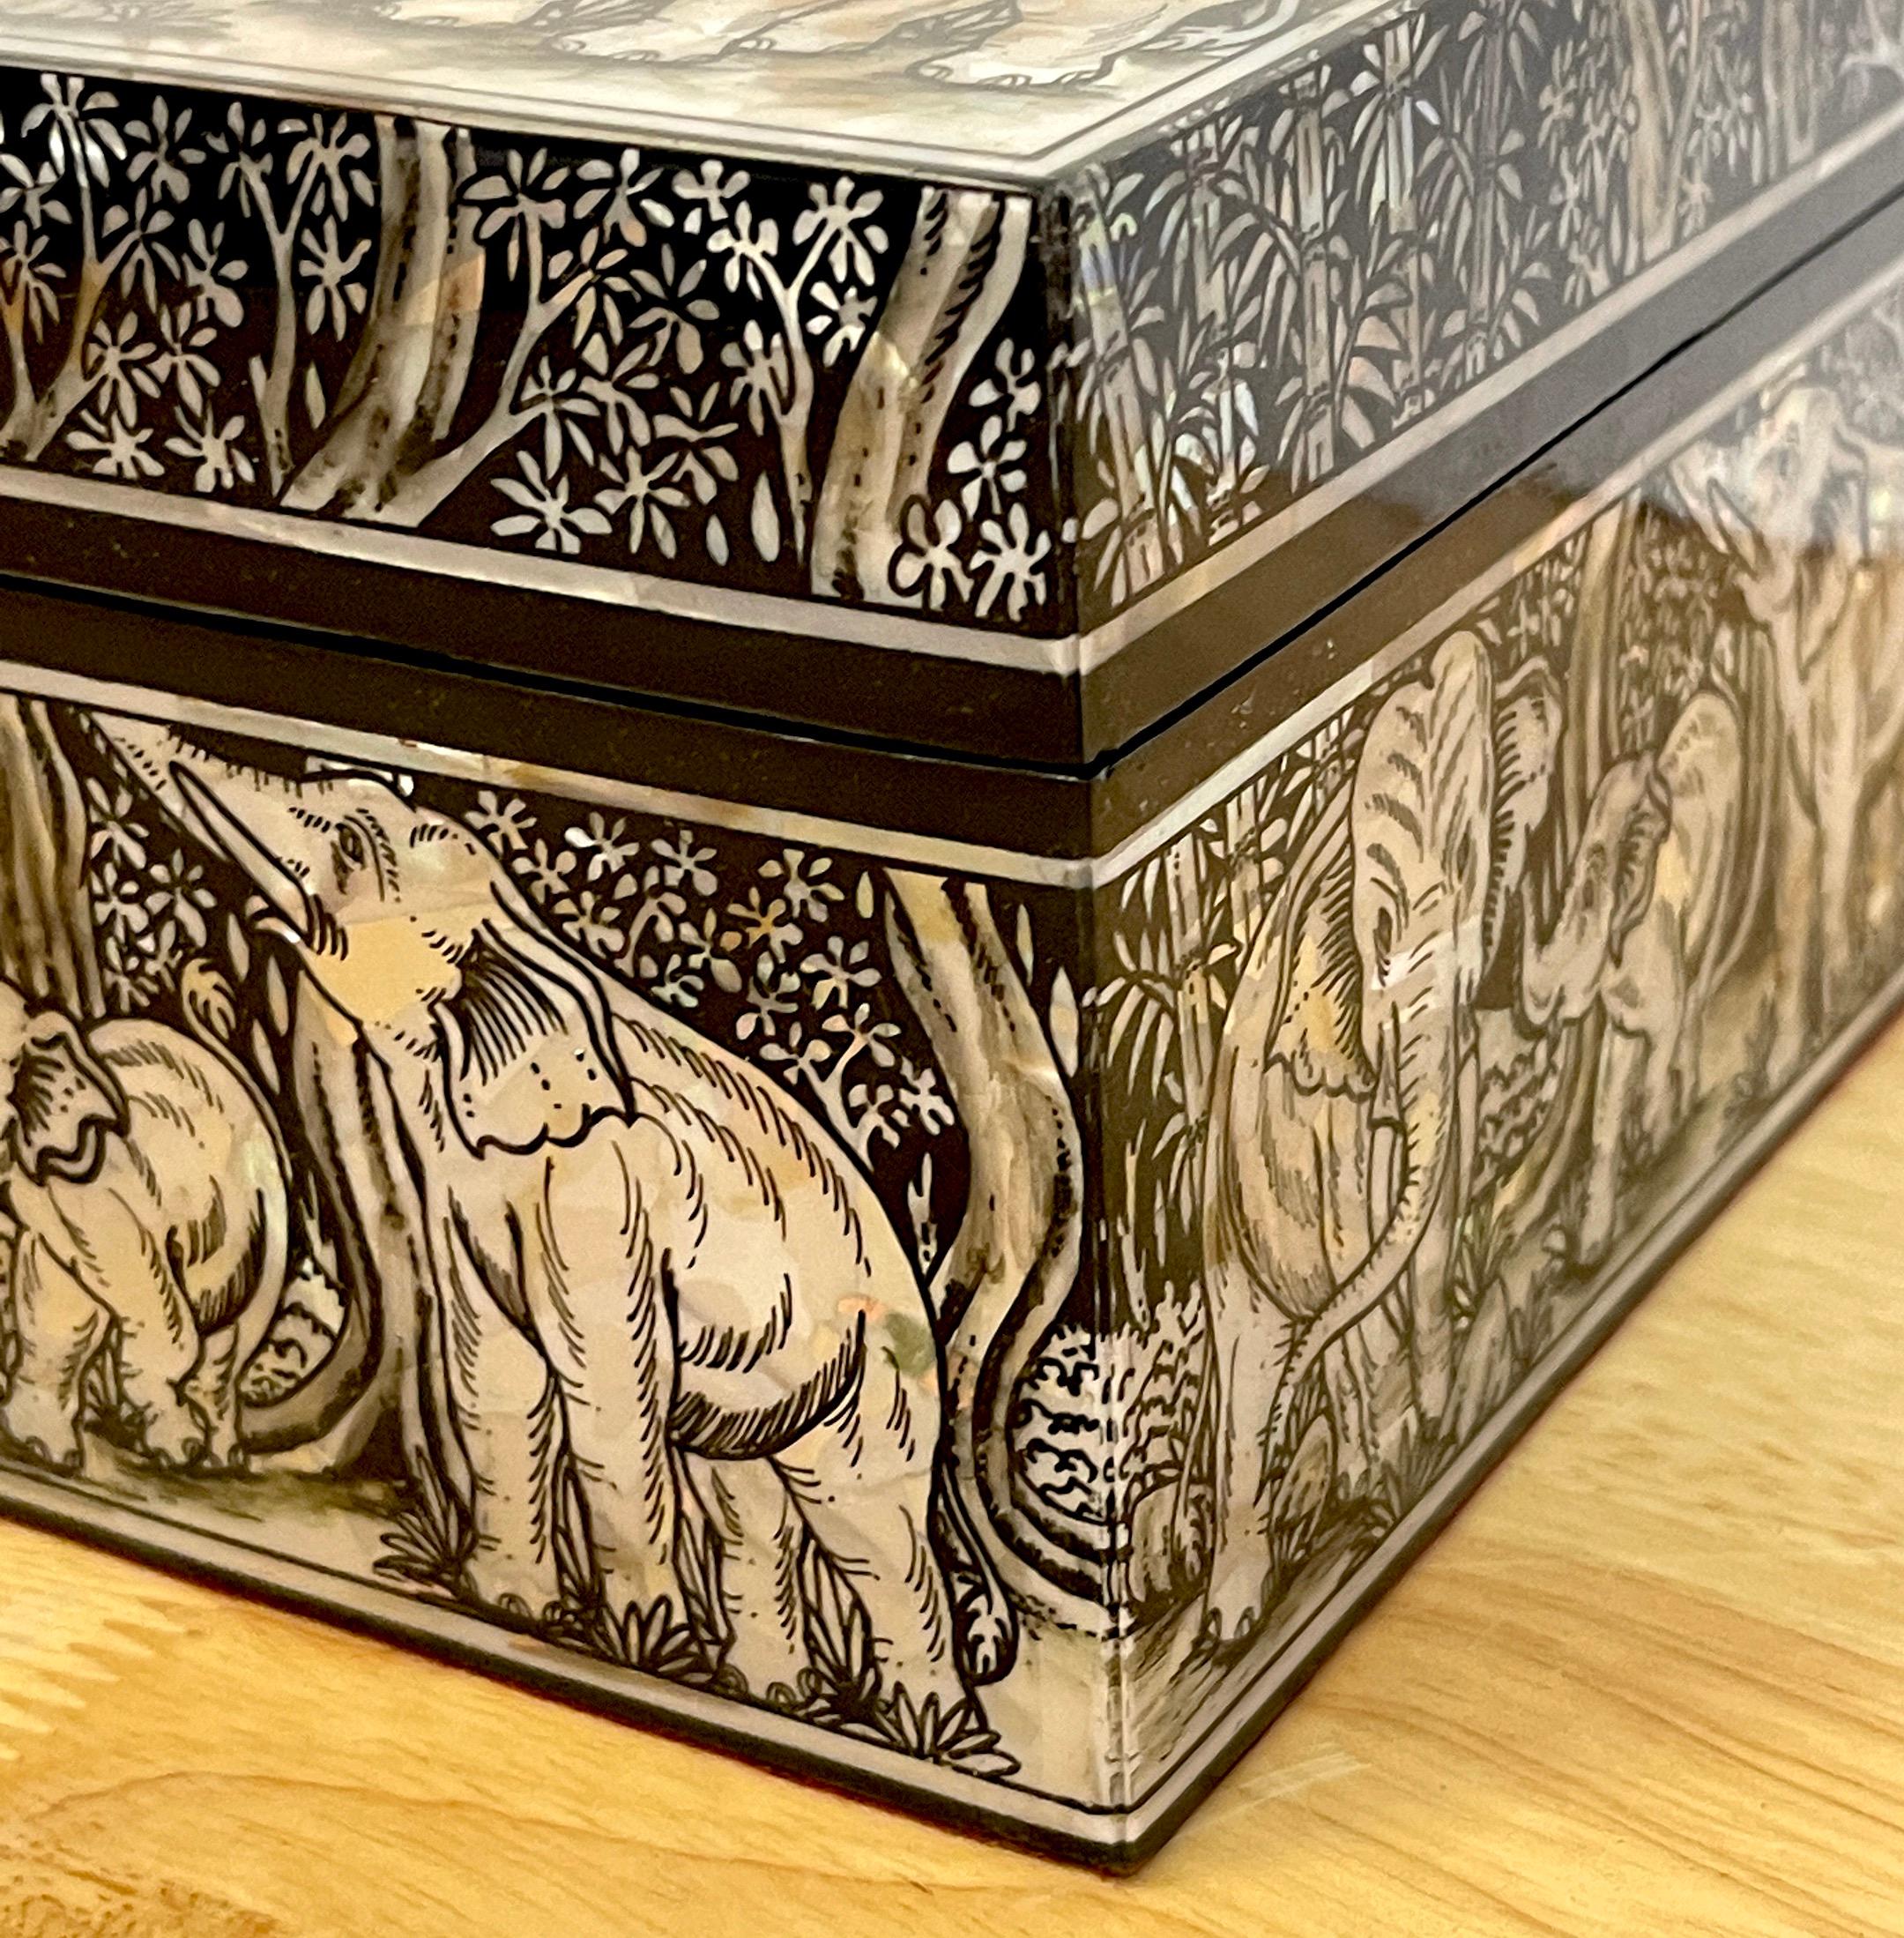 Anglo-Indian Exquisite Mother of Pearl Inlaid Lacquer Elephant Motif Tissue Box For Sale